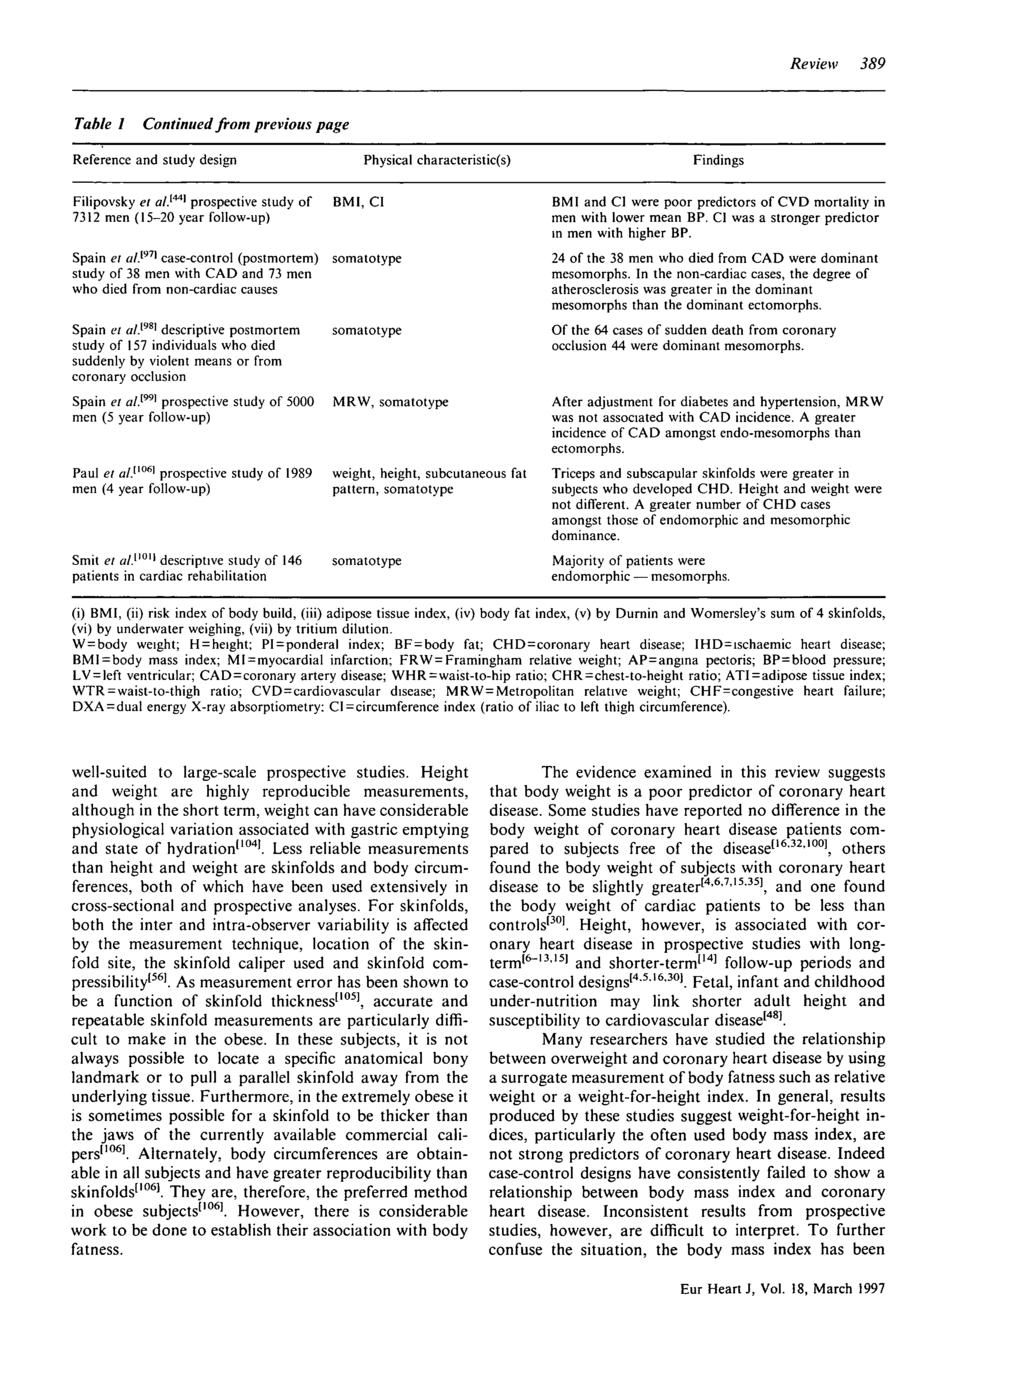 Review 389 Table 1 Continued from previous page Reference and study design Physical characteristic(s) Findings Filipovsky el o/.' 44 ' prospective study of 7312 men (15-20 year follow-up) Spain el a/.